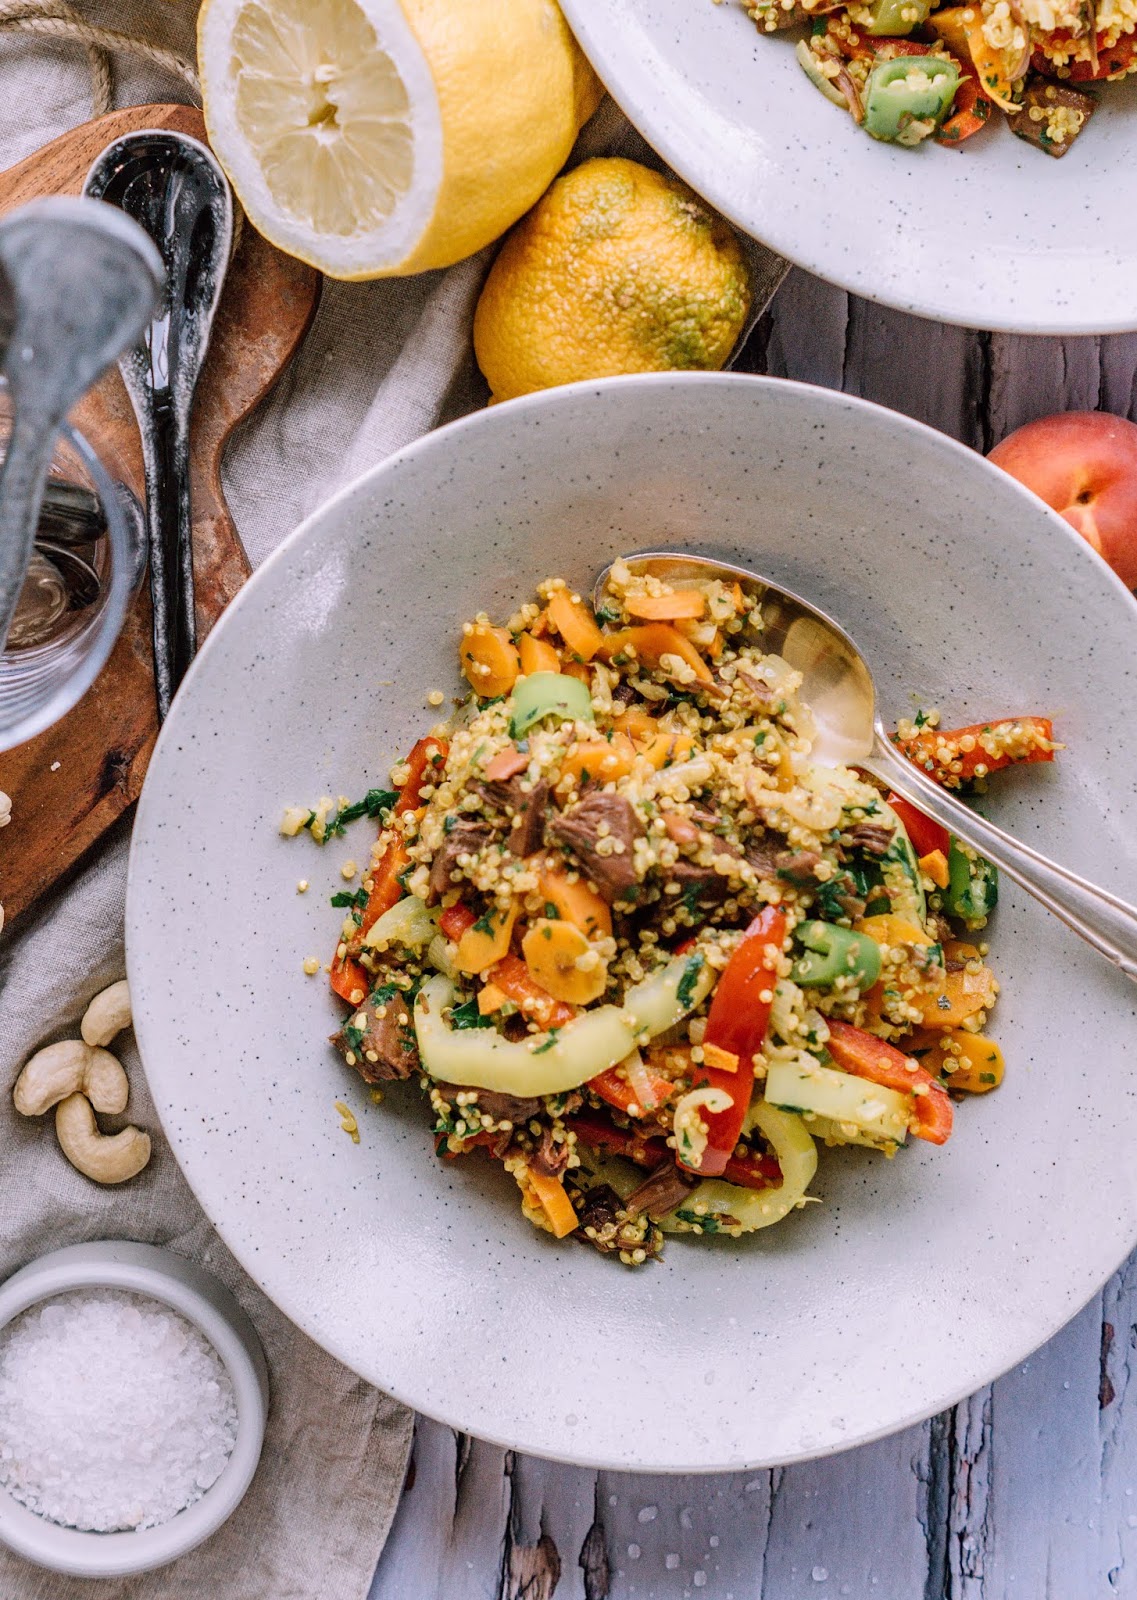 Spicy Quinoa Jackfruit Curry. Need more recipes? Find 20 Quick Vegan Lunch Recipes Perfect for Easy Meal Prep. vegan easy lunch ideas | easy vegan lunch ideas | vegan recipes healthy lunch | vegan meal ideas | vegan quick lunch #veganlunch #vegan #curry #healthy